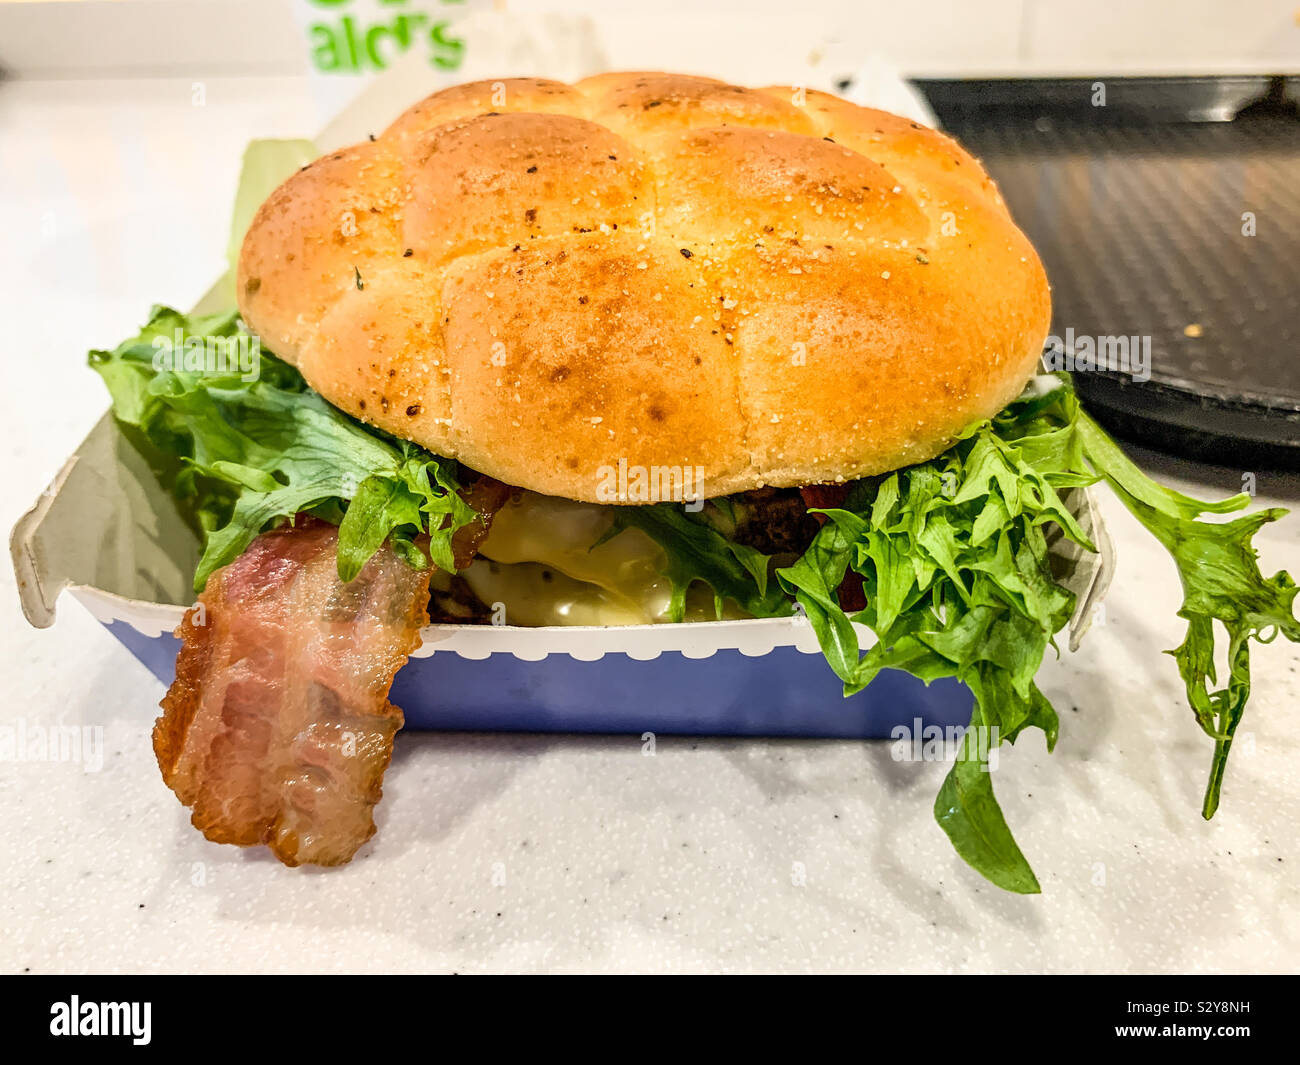 McDonald’s The French Stack double burger Stock Photo